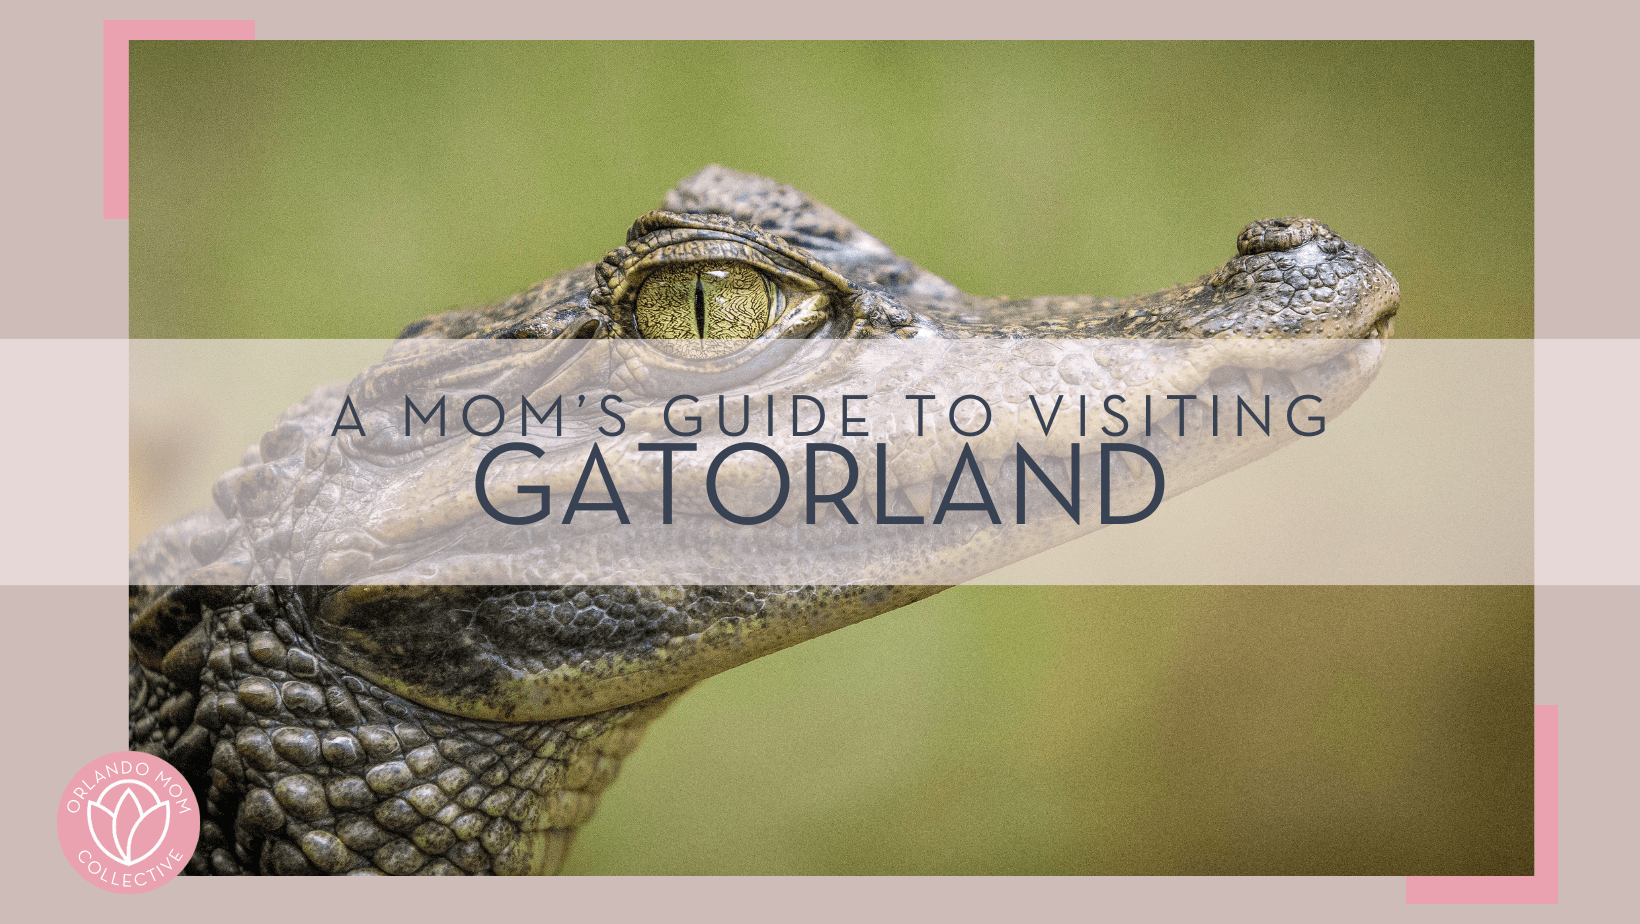 gaetano-cessati-via unsplash photo of small alligator from the side with 'a moms guide to visiting gatorland' in text on top of photo